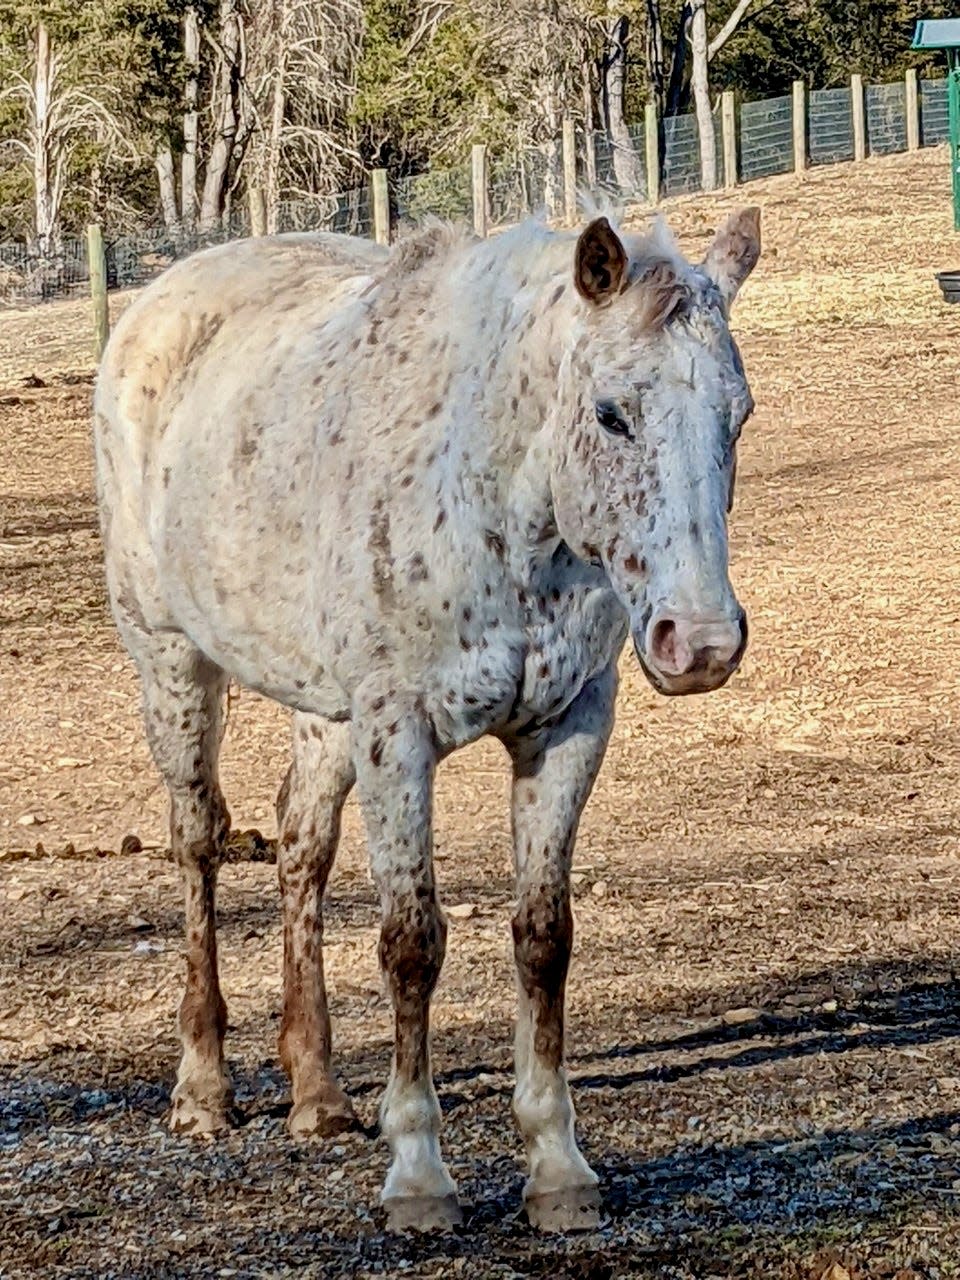 A recent picture of Iris, now &quot;fat and happy&quot; at a Clear Spring-area farm, said Karen Martin. Martin, who notified the Humane Society of Washington County of Iris' poor condition at another farm in May 2021, adopted the horse.